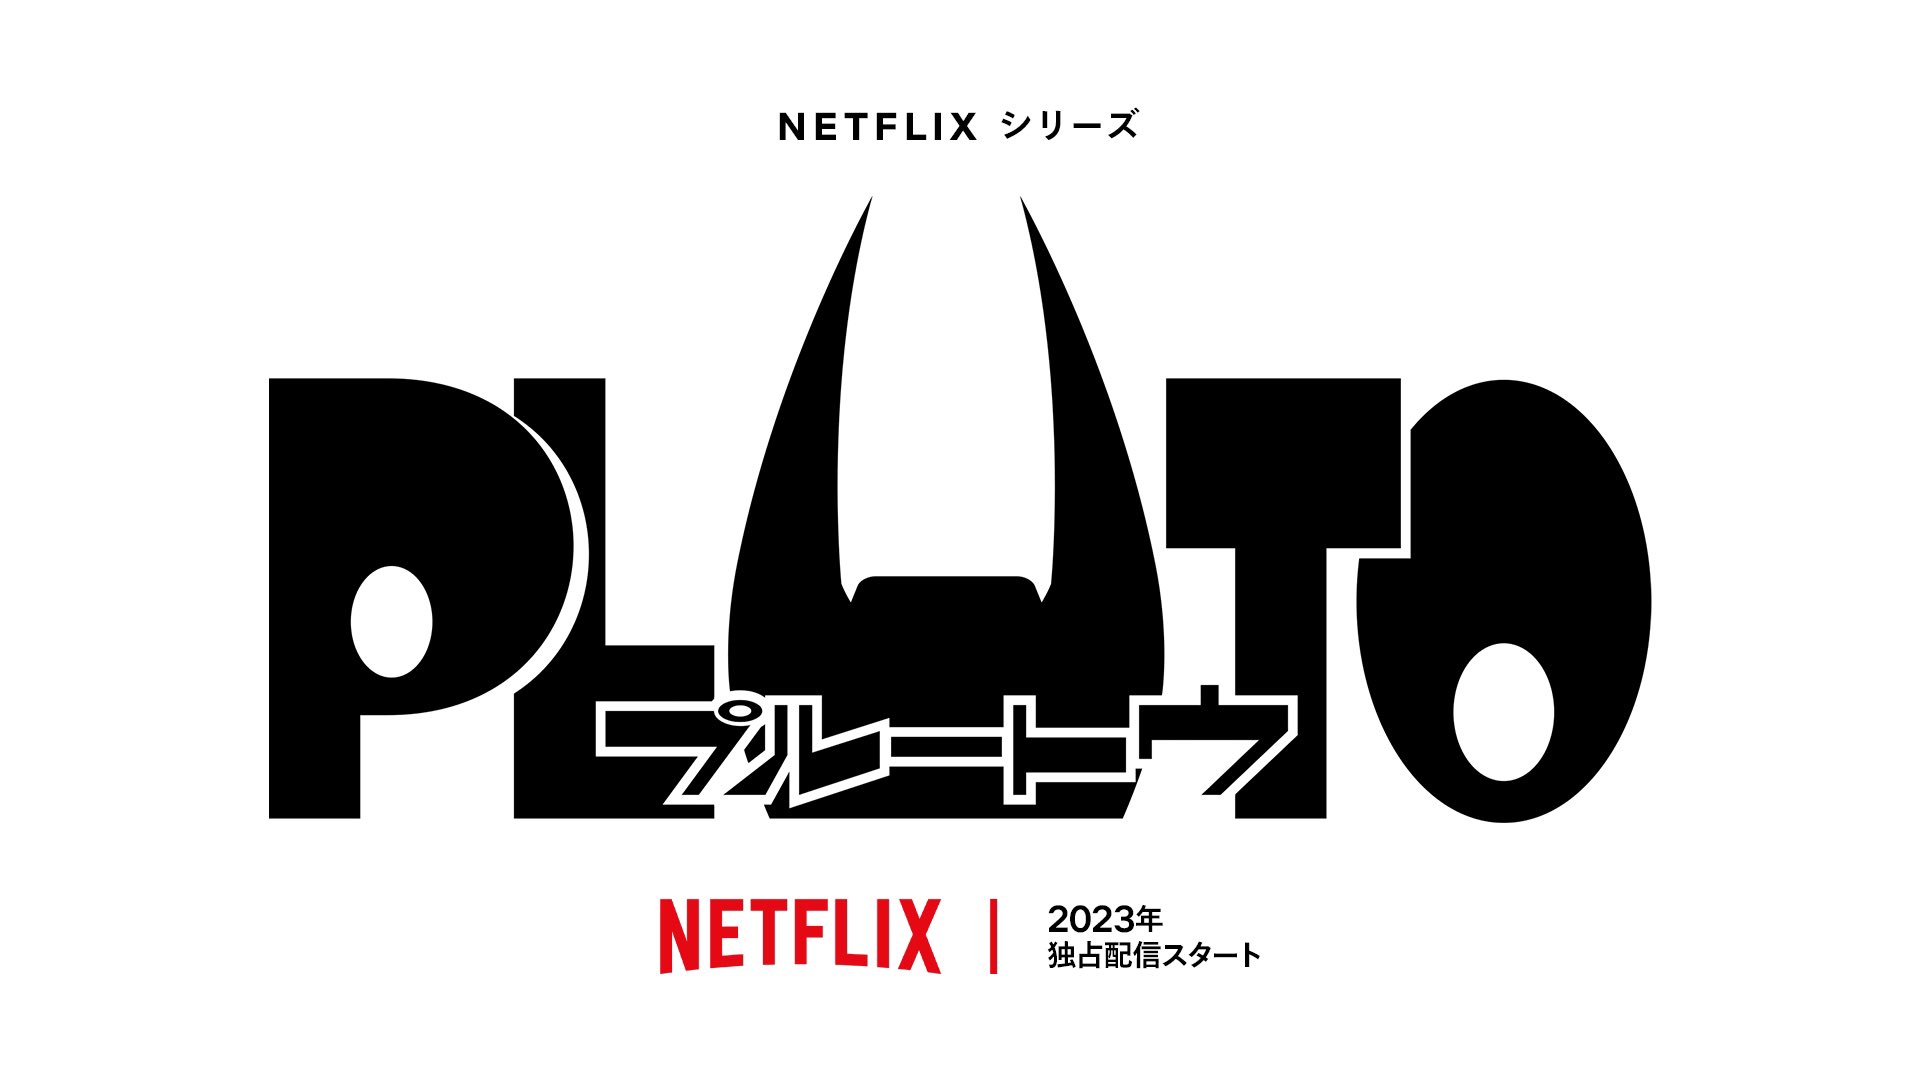 PLUTO Anime To Stream On Netflix In 2023, New Trailer Released